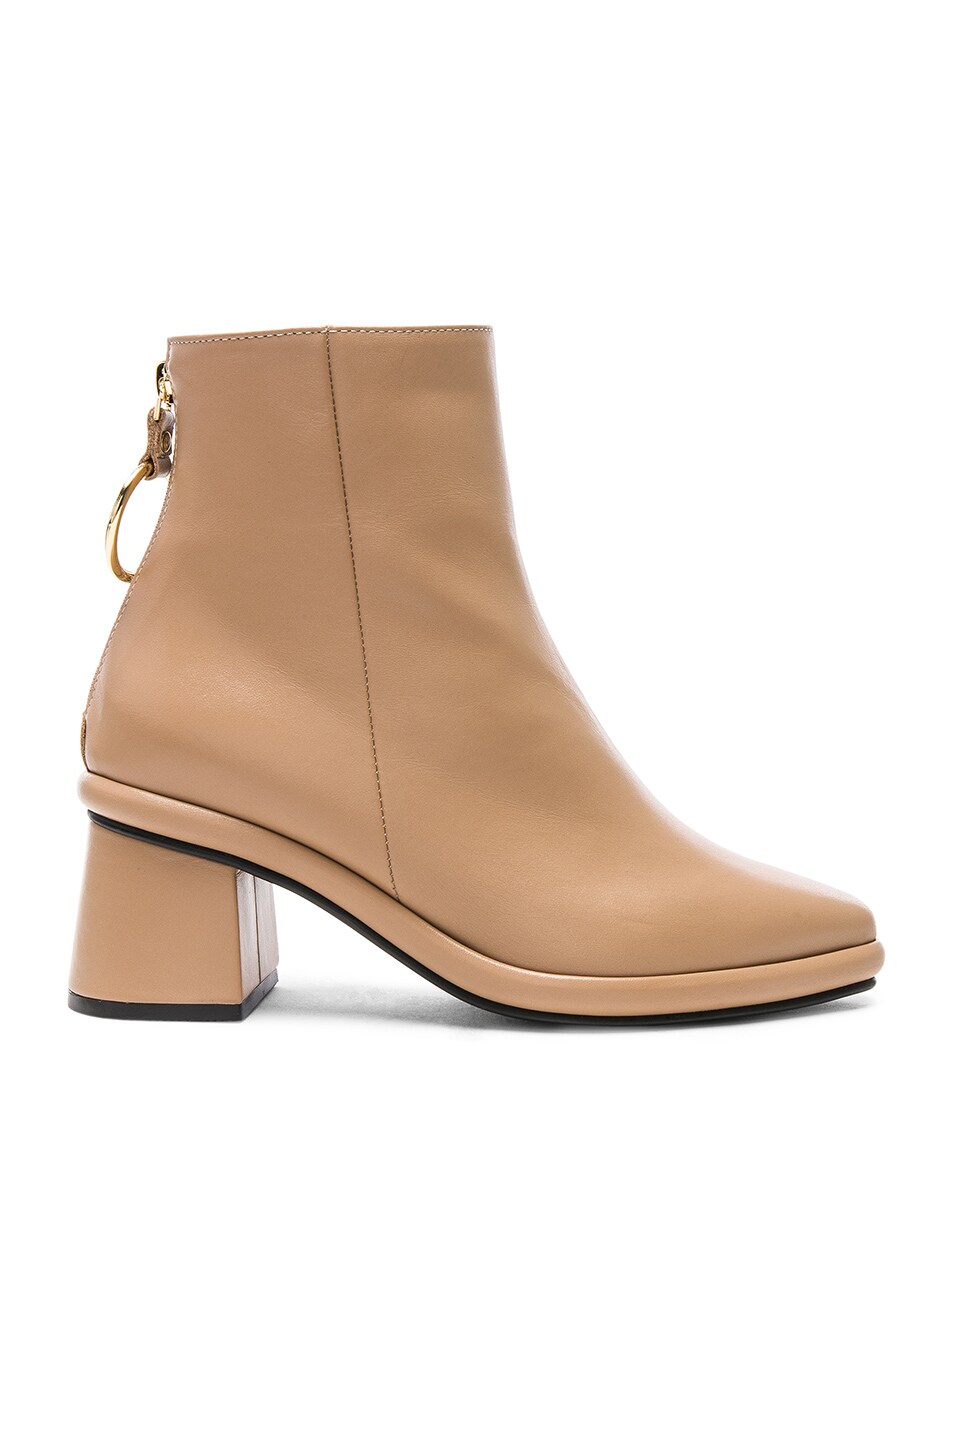 Image 1 of Reike Nen Leather Ring Slim Boots in Beige